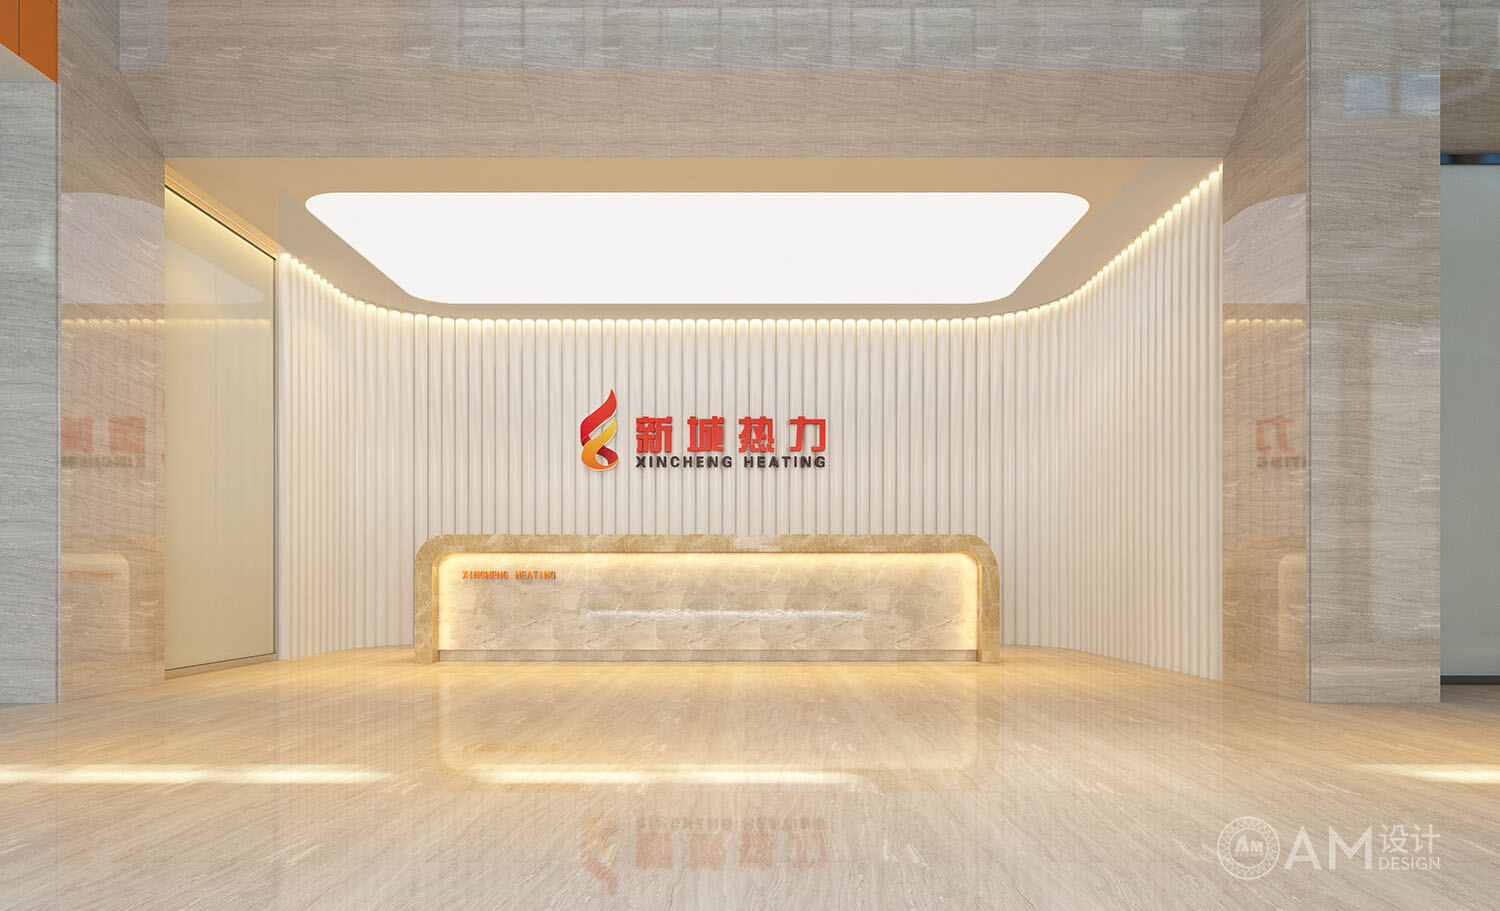 AM DESIGN | Front desk design of Beijing Xincheng Thermal Group office building